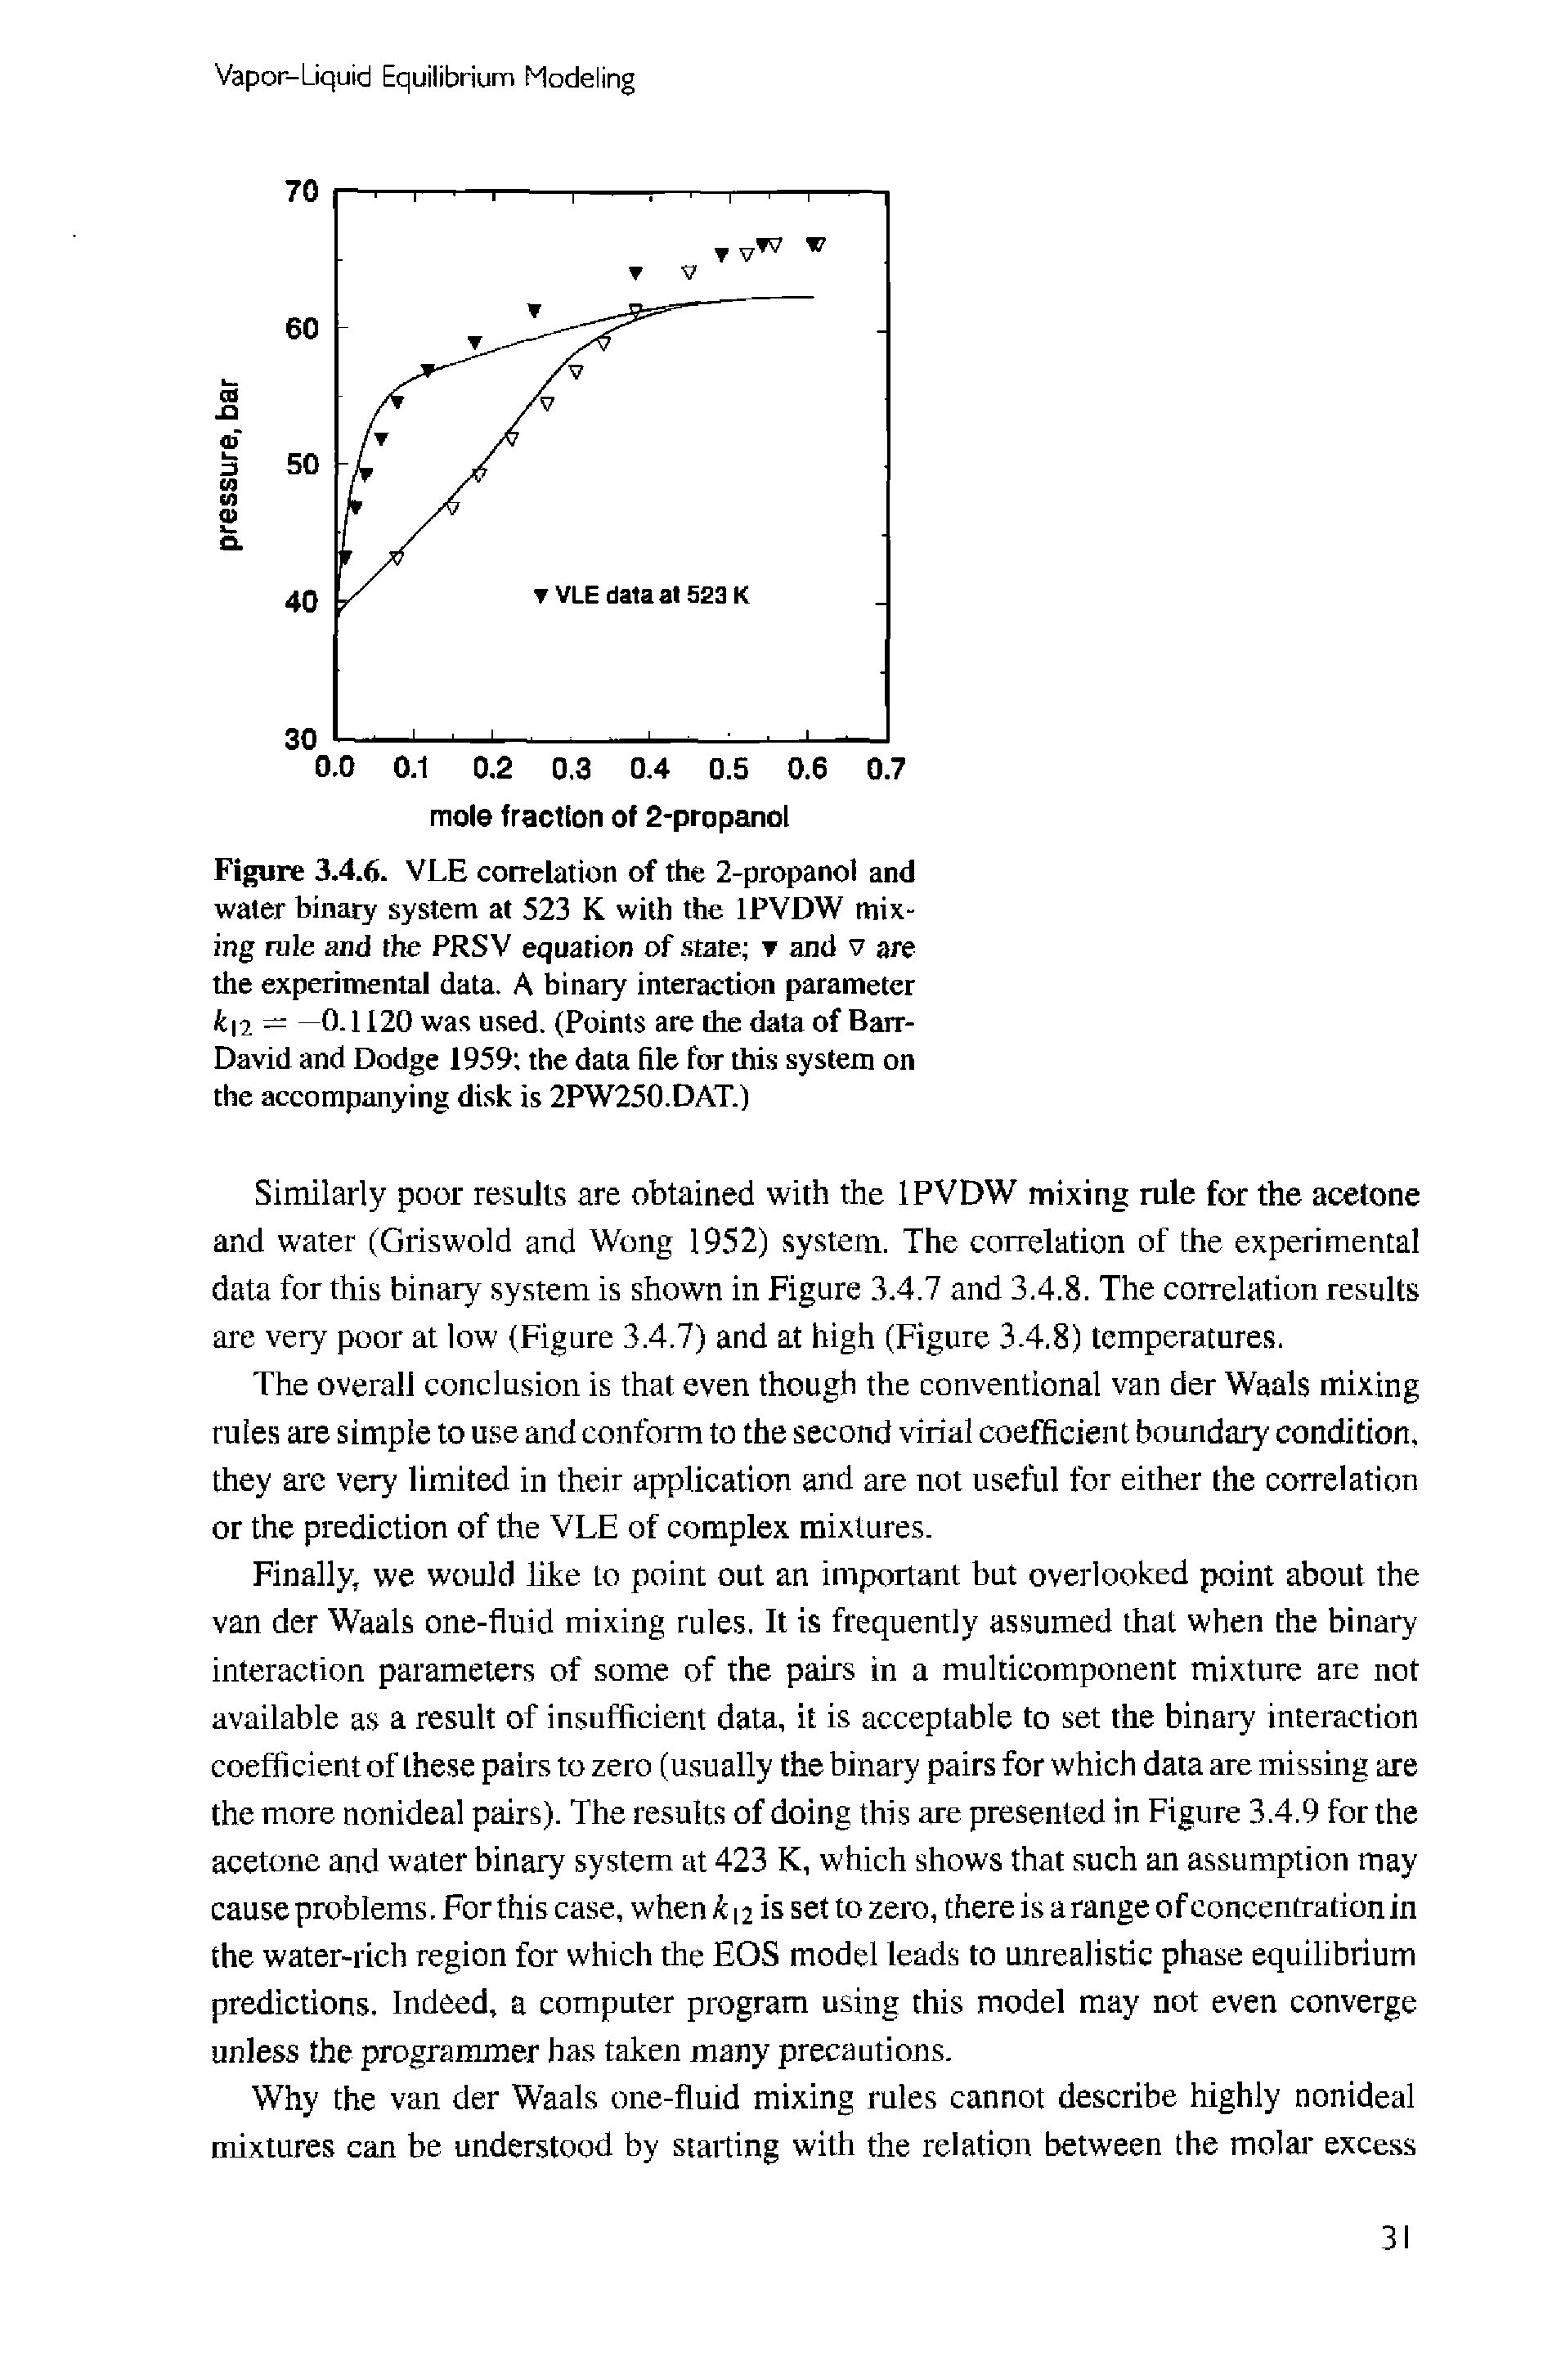 Figure 3.4.6. VLE correlation of the 2-propanot and water binary system at 523 K with the IPVDW mixing rule and the PRS V equation of state and v are the experimental data. A binary interaction parameter fei2 = —0.1120 was used. (Points are the data of Barr-David and Dodge 1959 the data file for this system on the accompanying disk is 2PW250.DAT.)...